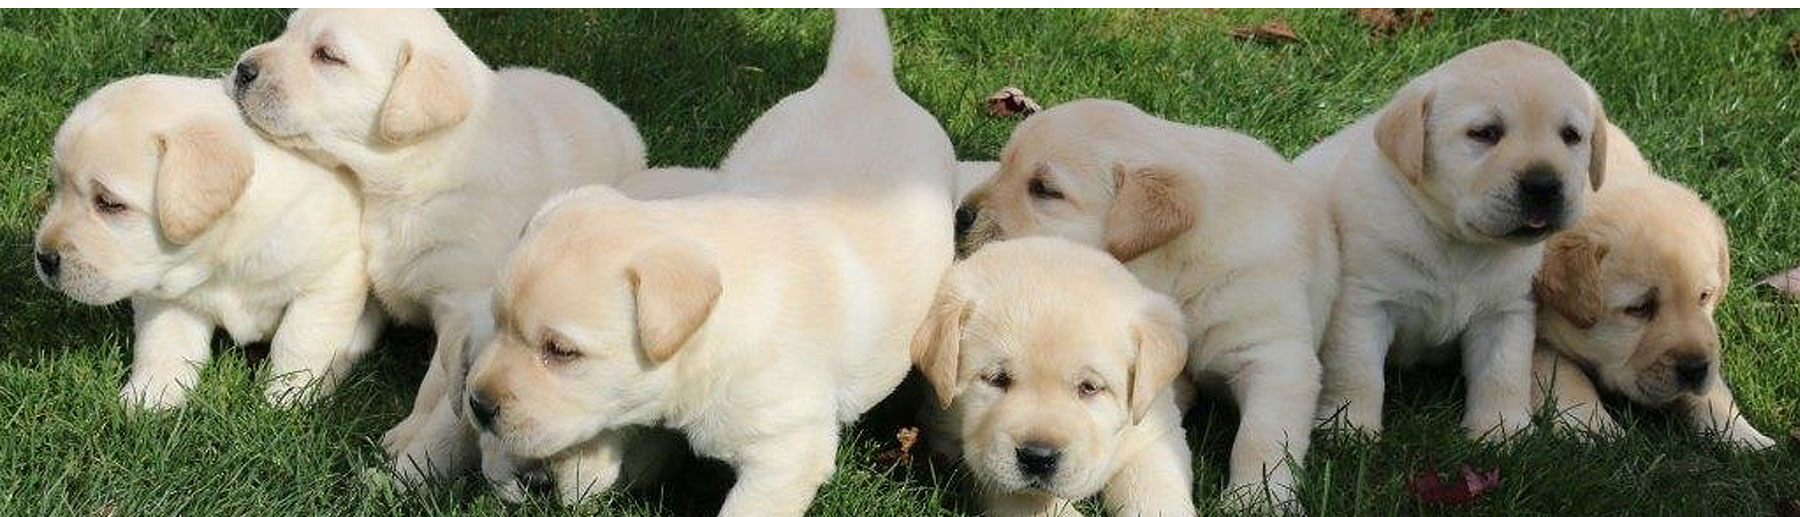 Endless Mountain Labradors Launches Redesigned Website 